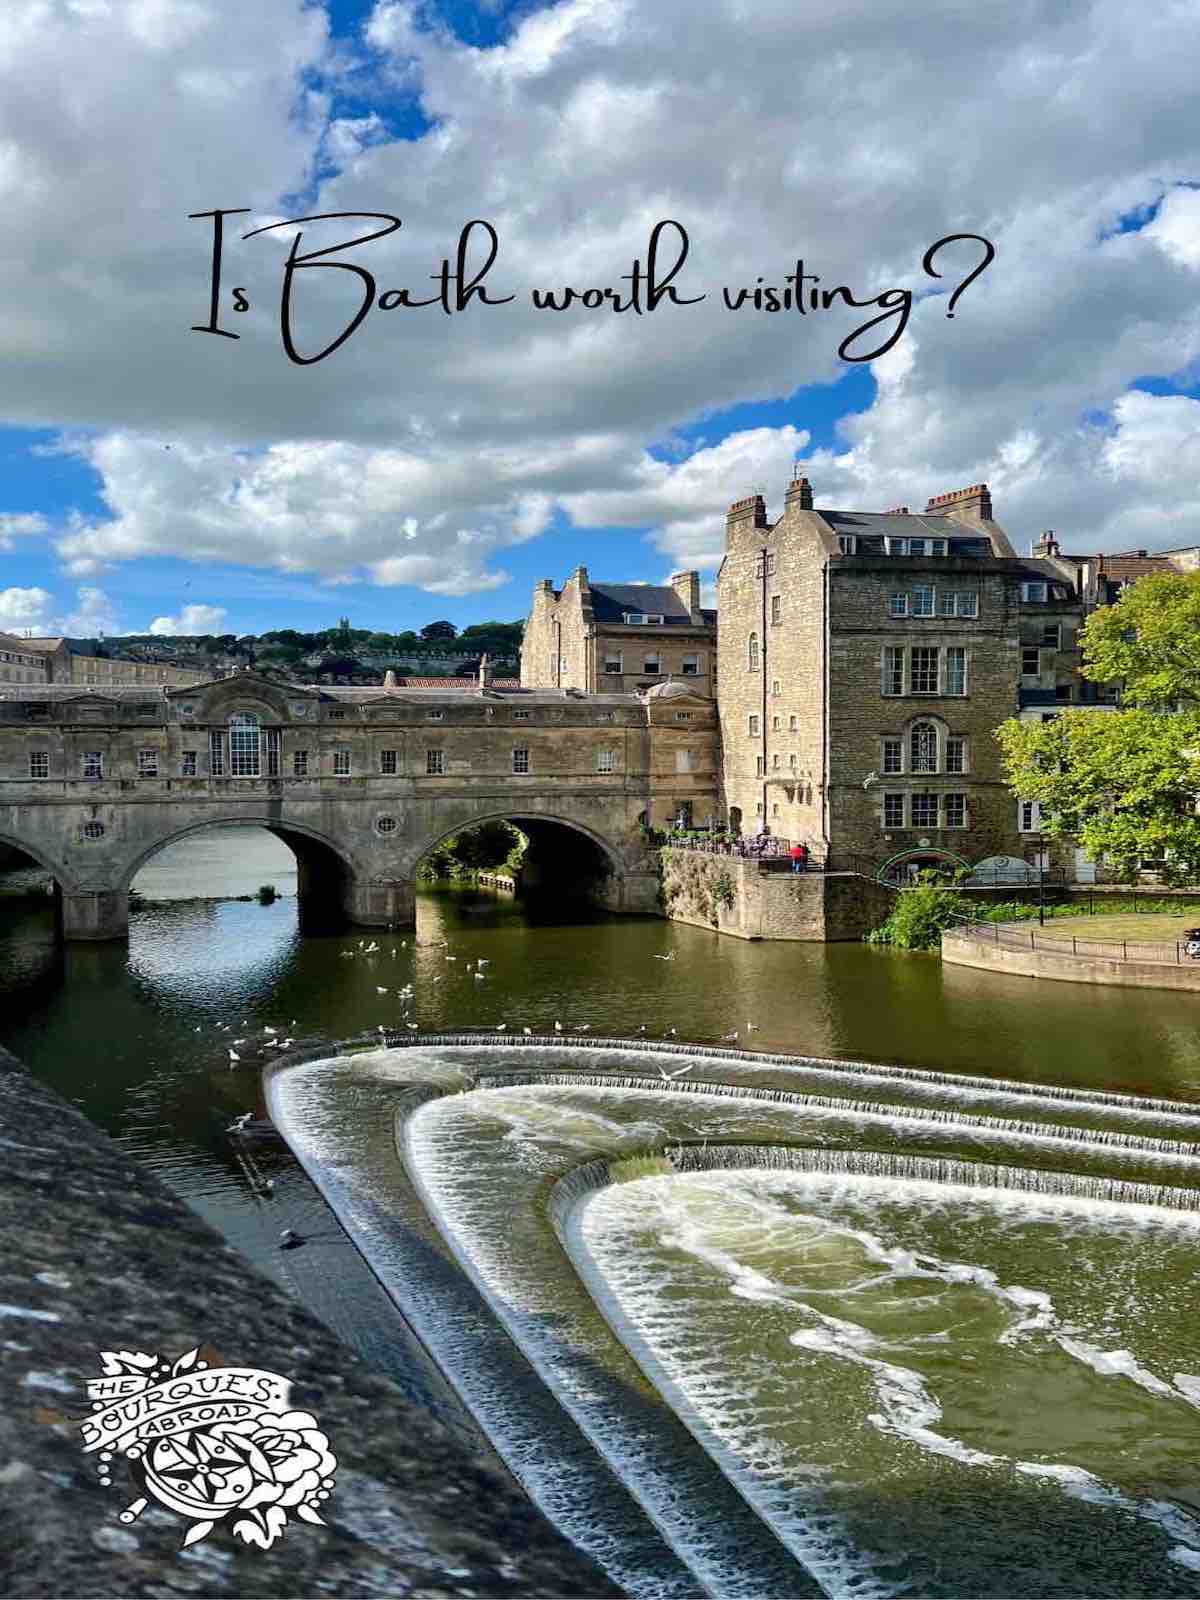 is bath worth visiting? yes, for the pultney bridge